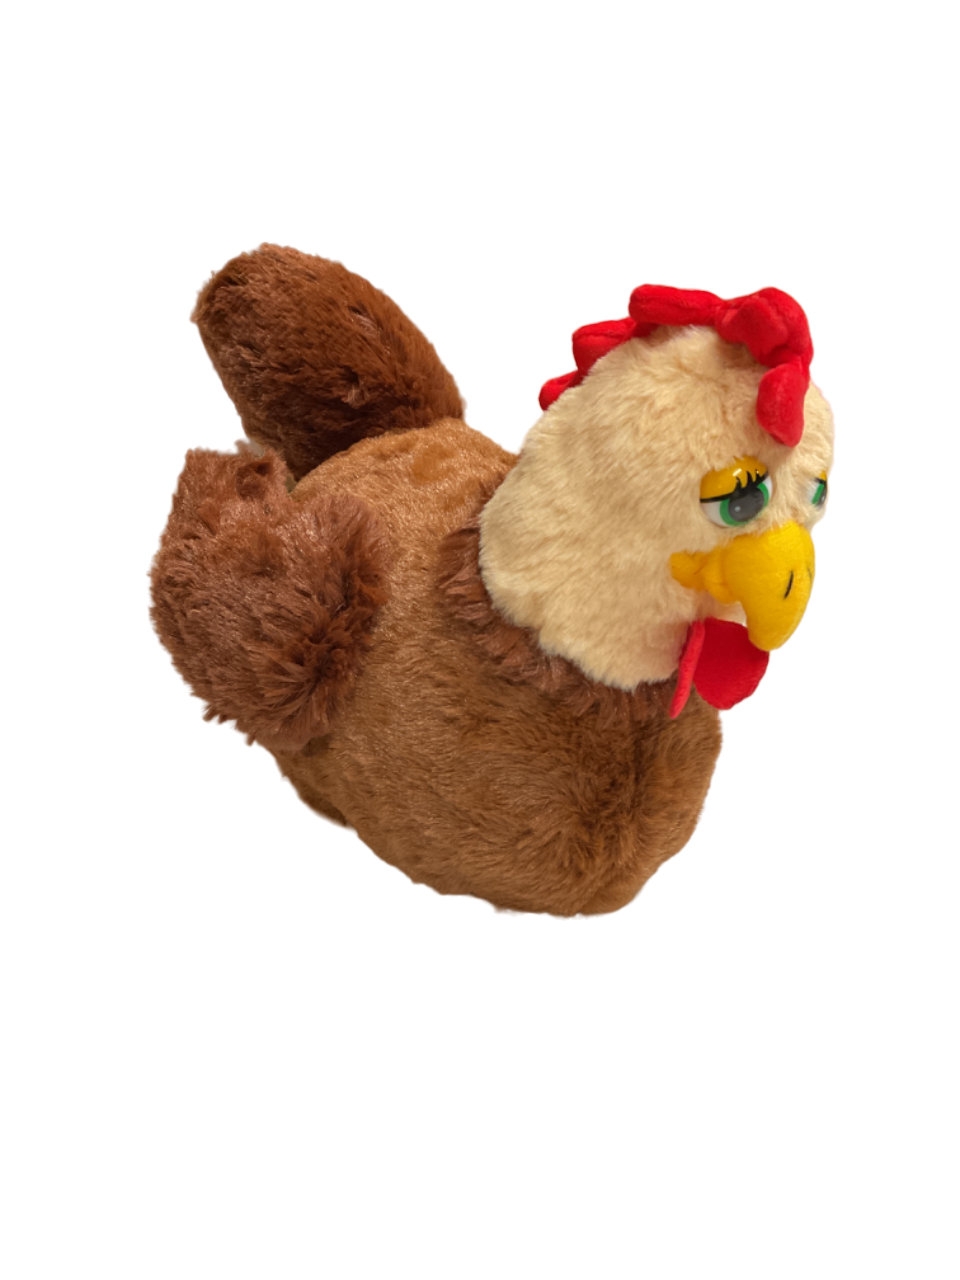 Rooster Plush